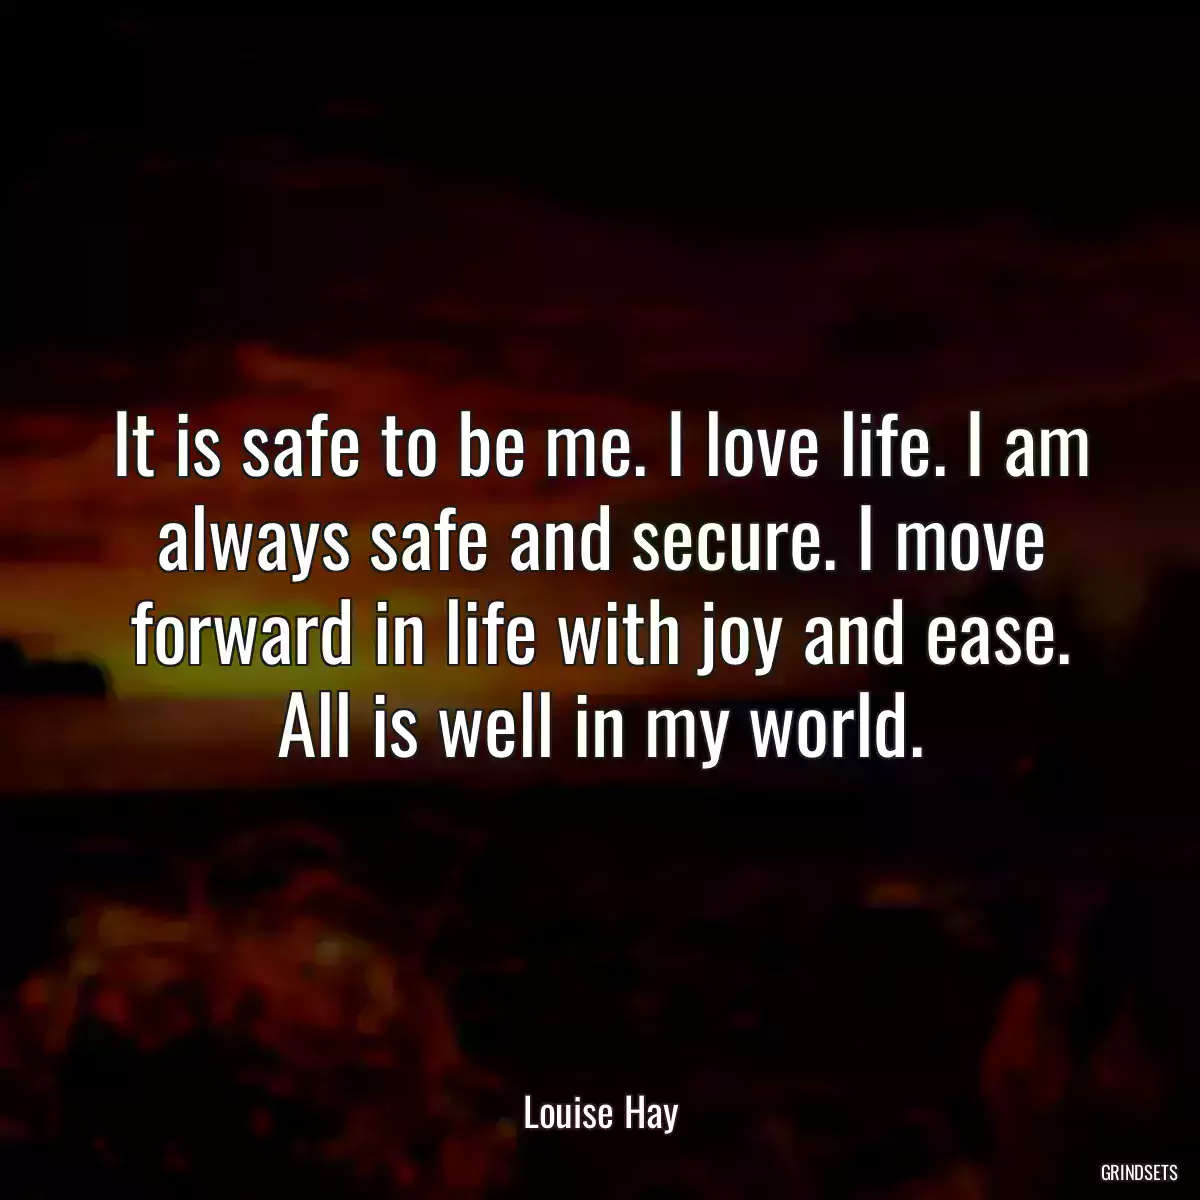 It is safe to be me. I love life. I am always safe and secure. I move forward in life with joy and ease. All is well in my world.